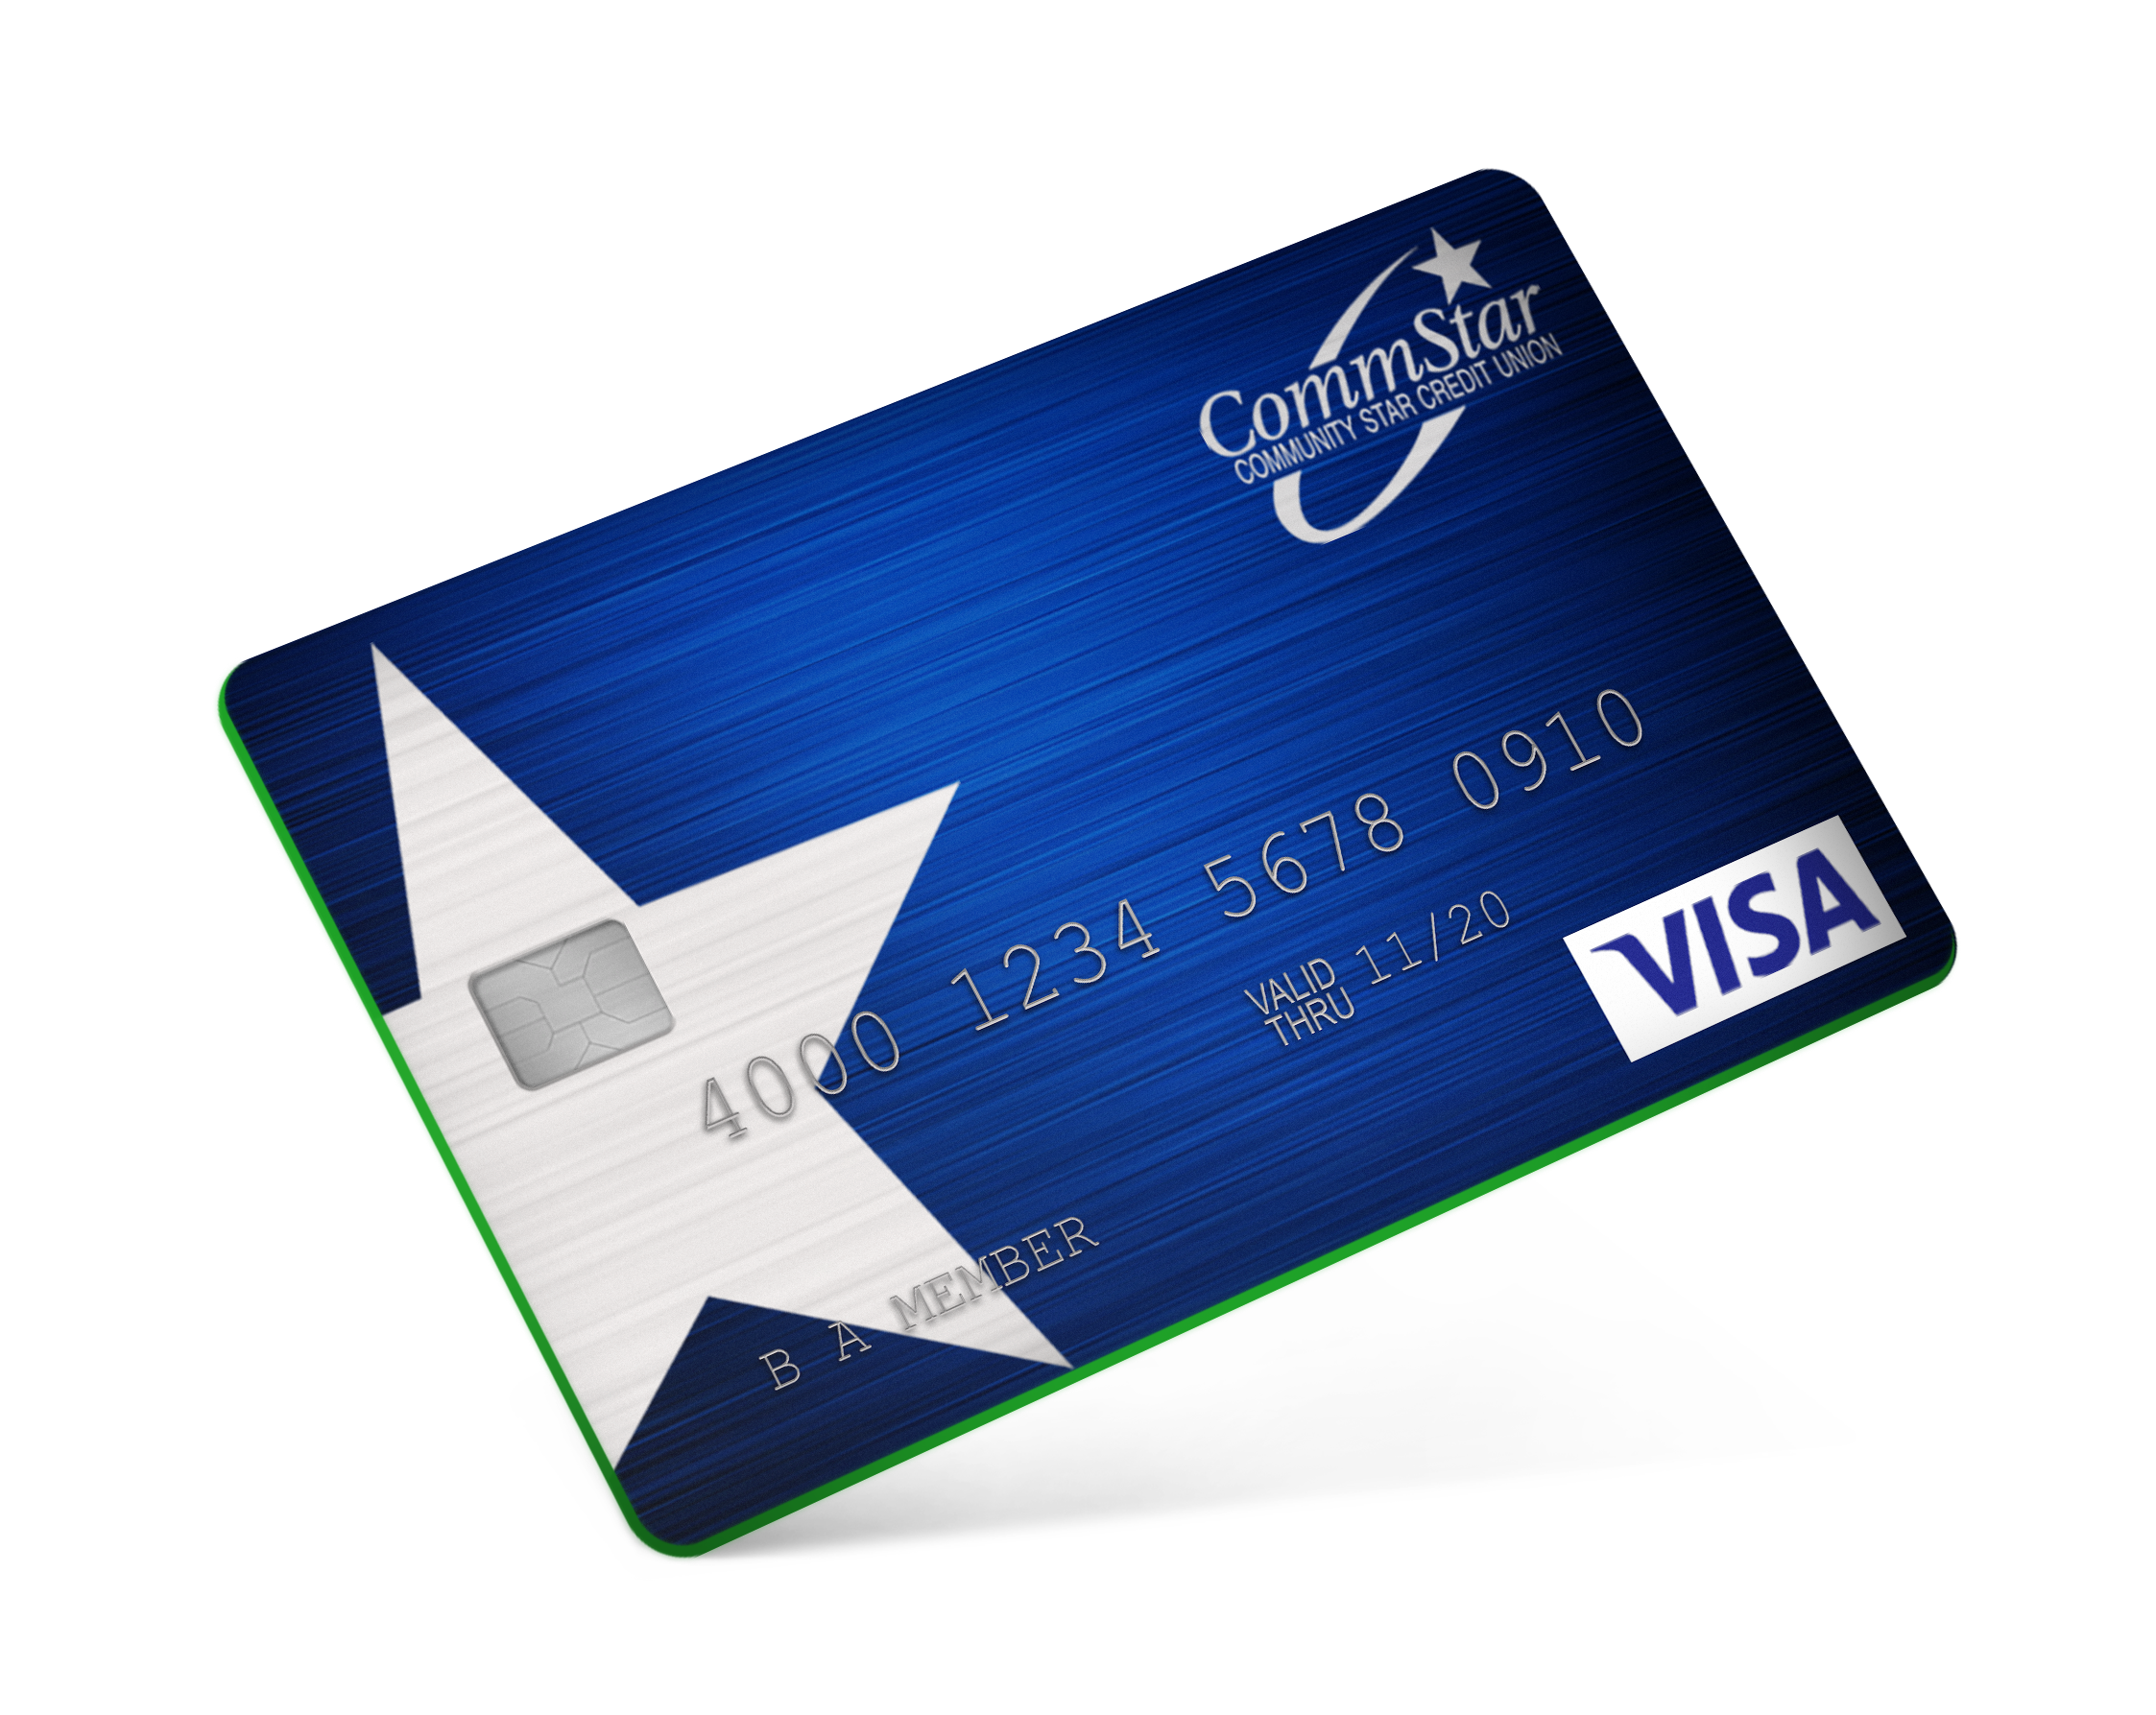 Image: blue and green credit card